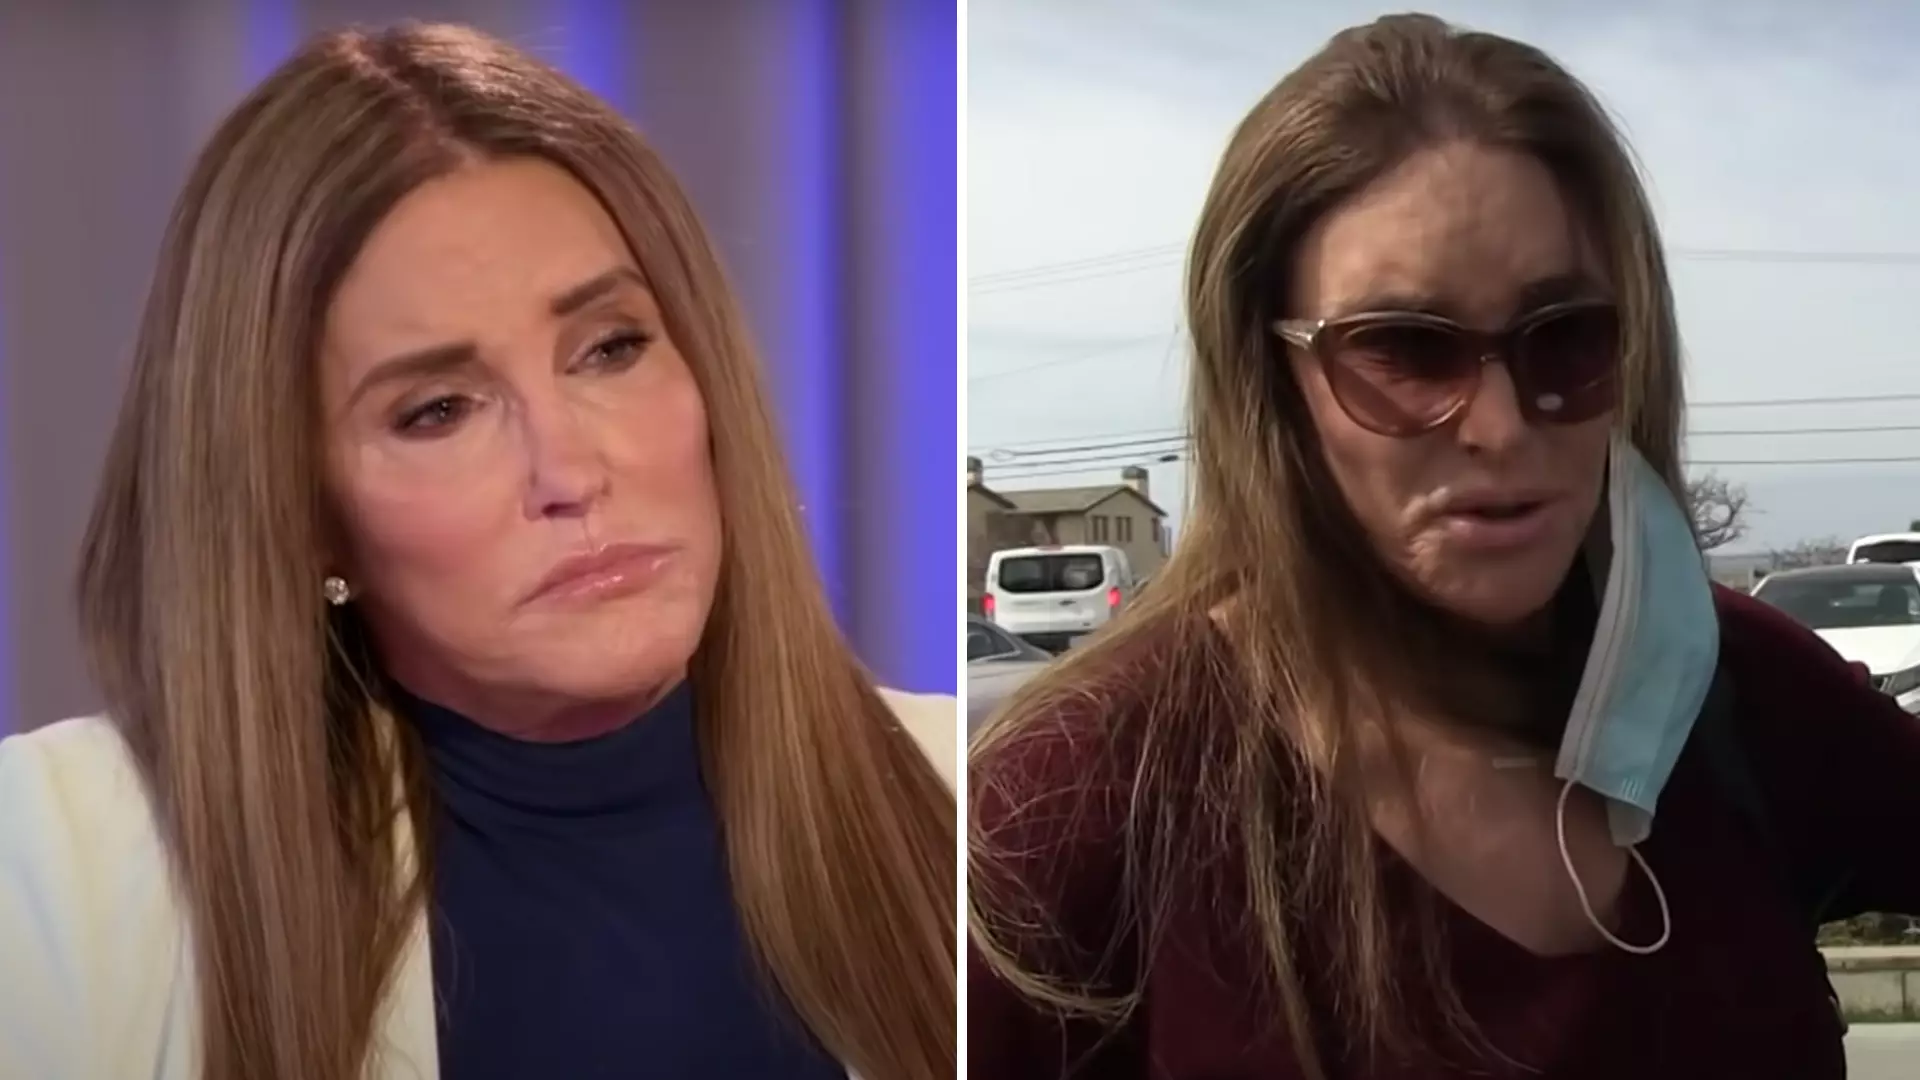 Caitlyn Jenner Doubles Down On Ban For Transgender Athletes To NOT Play On Girls' Sports Teams